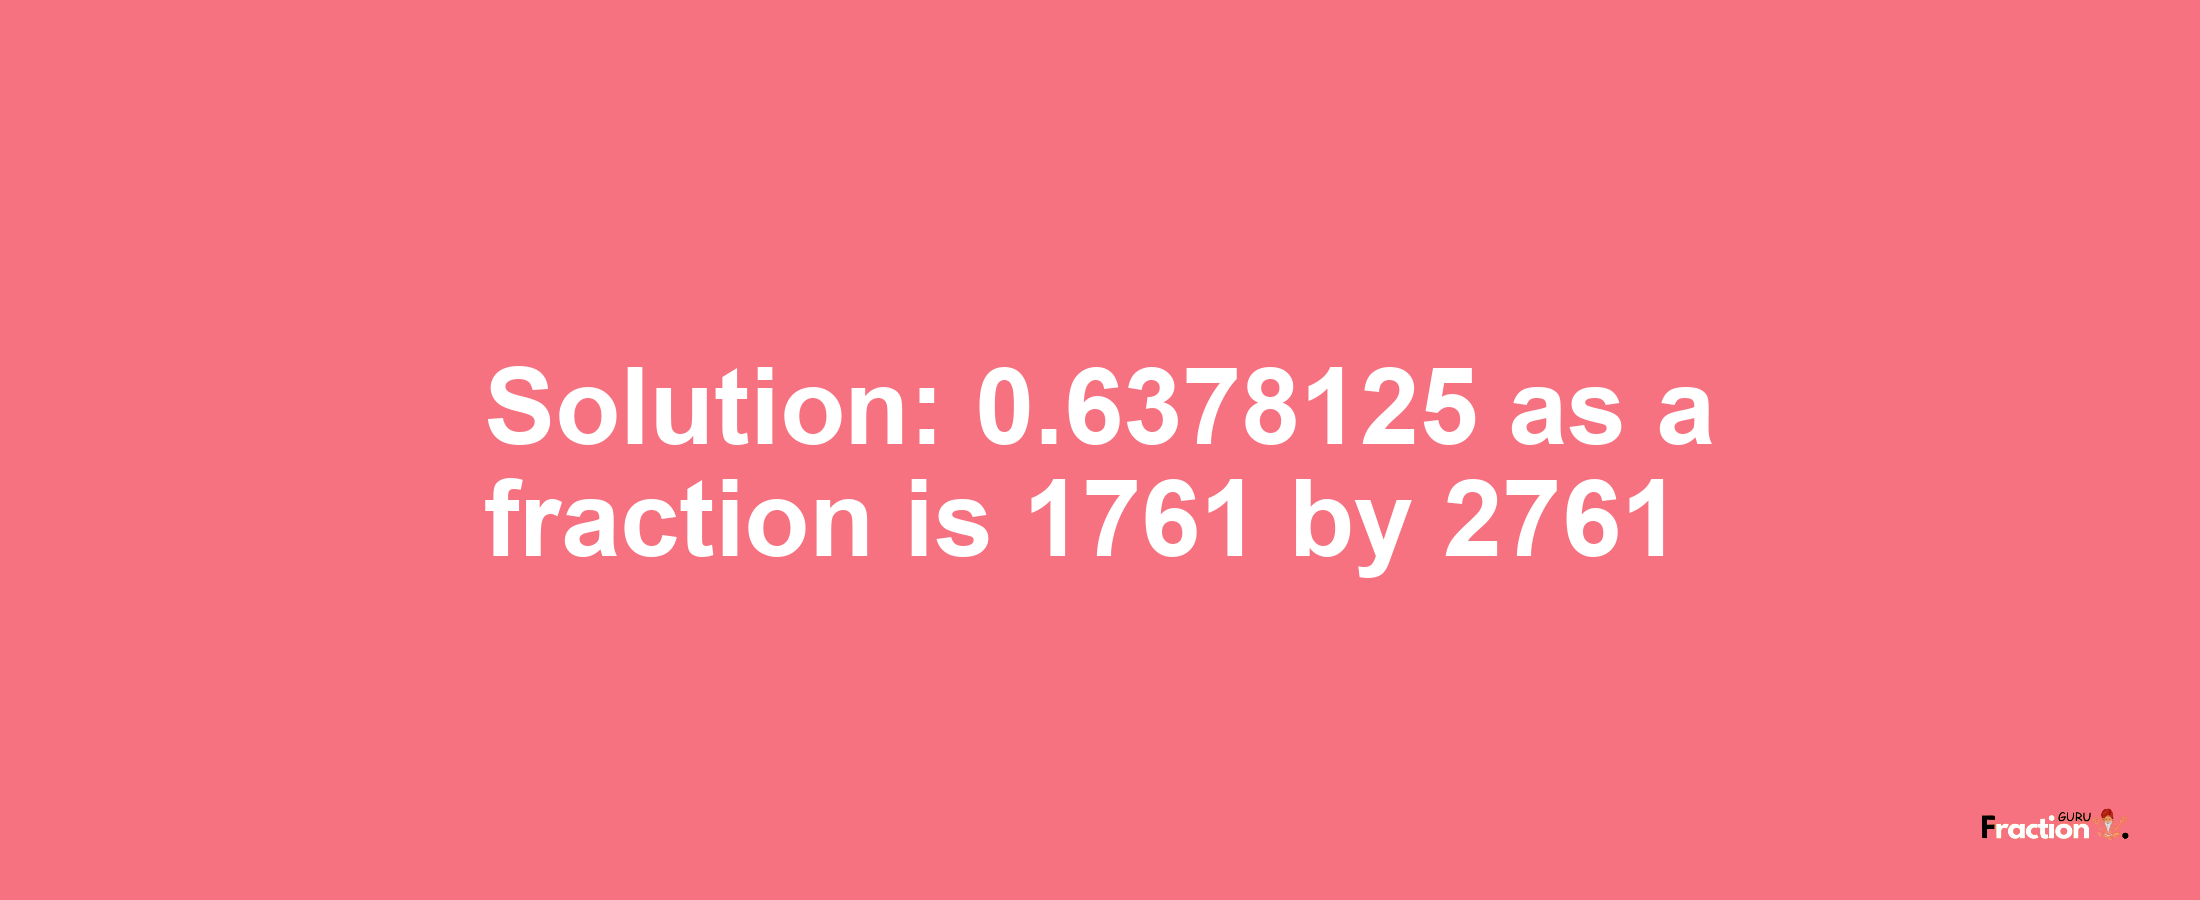 Solution:0.6378125 as a fraction is 1761/2761